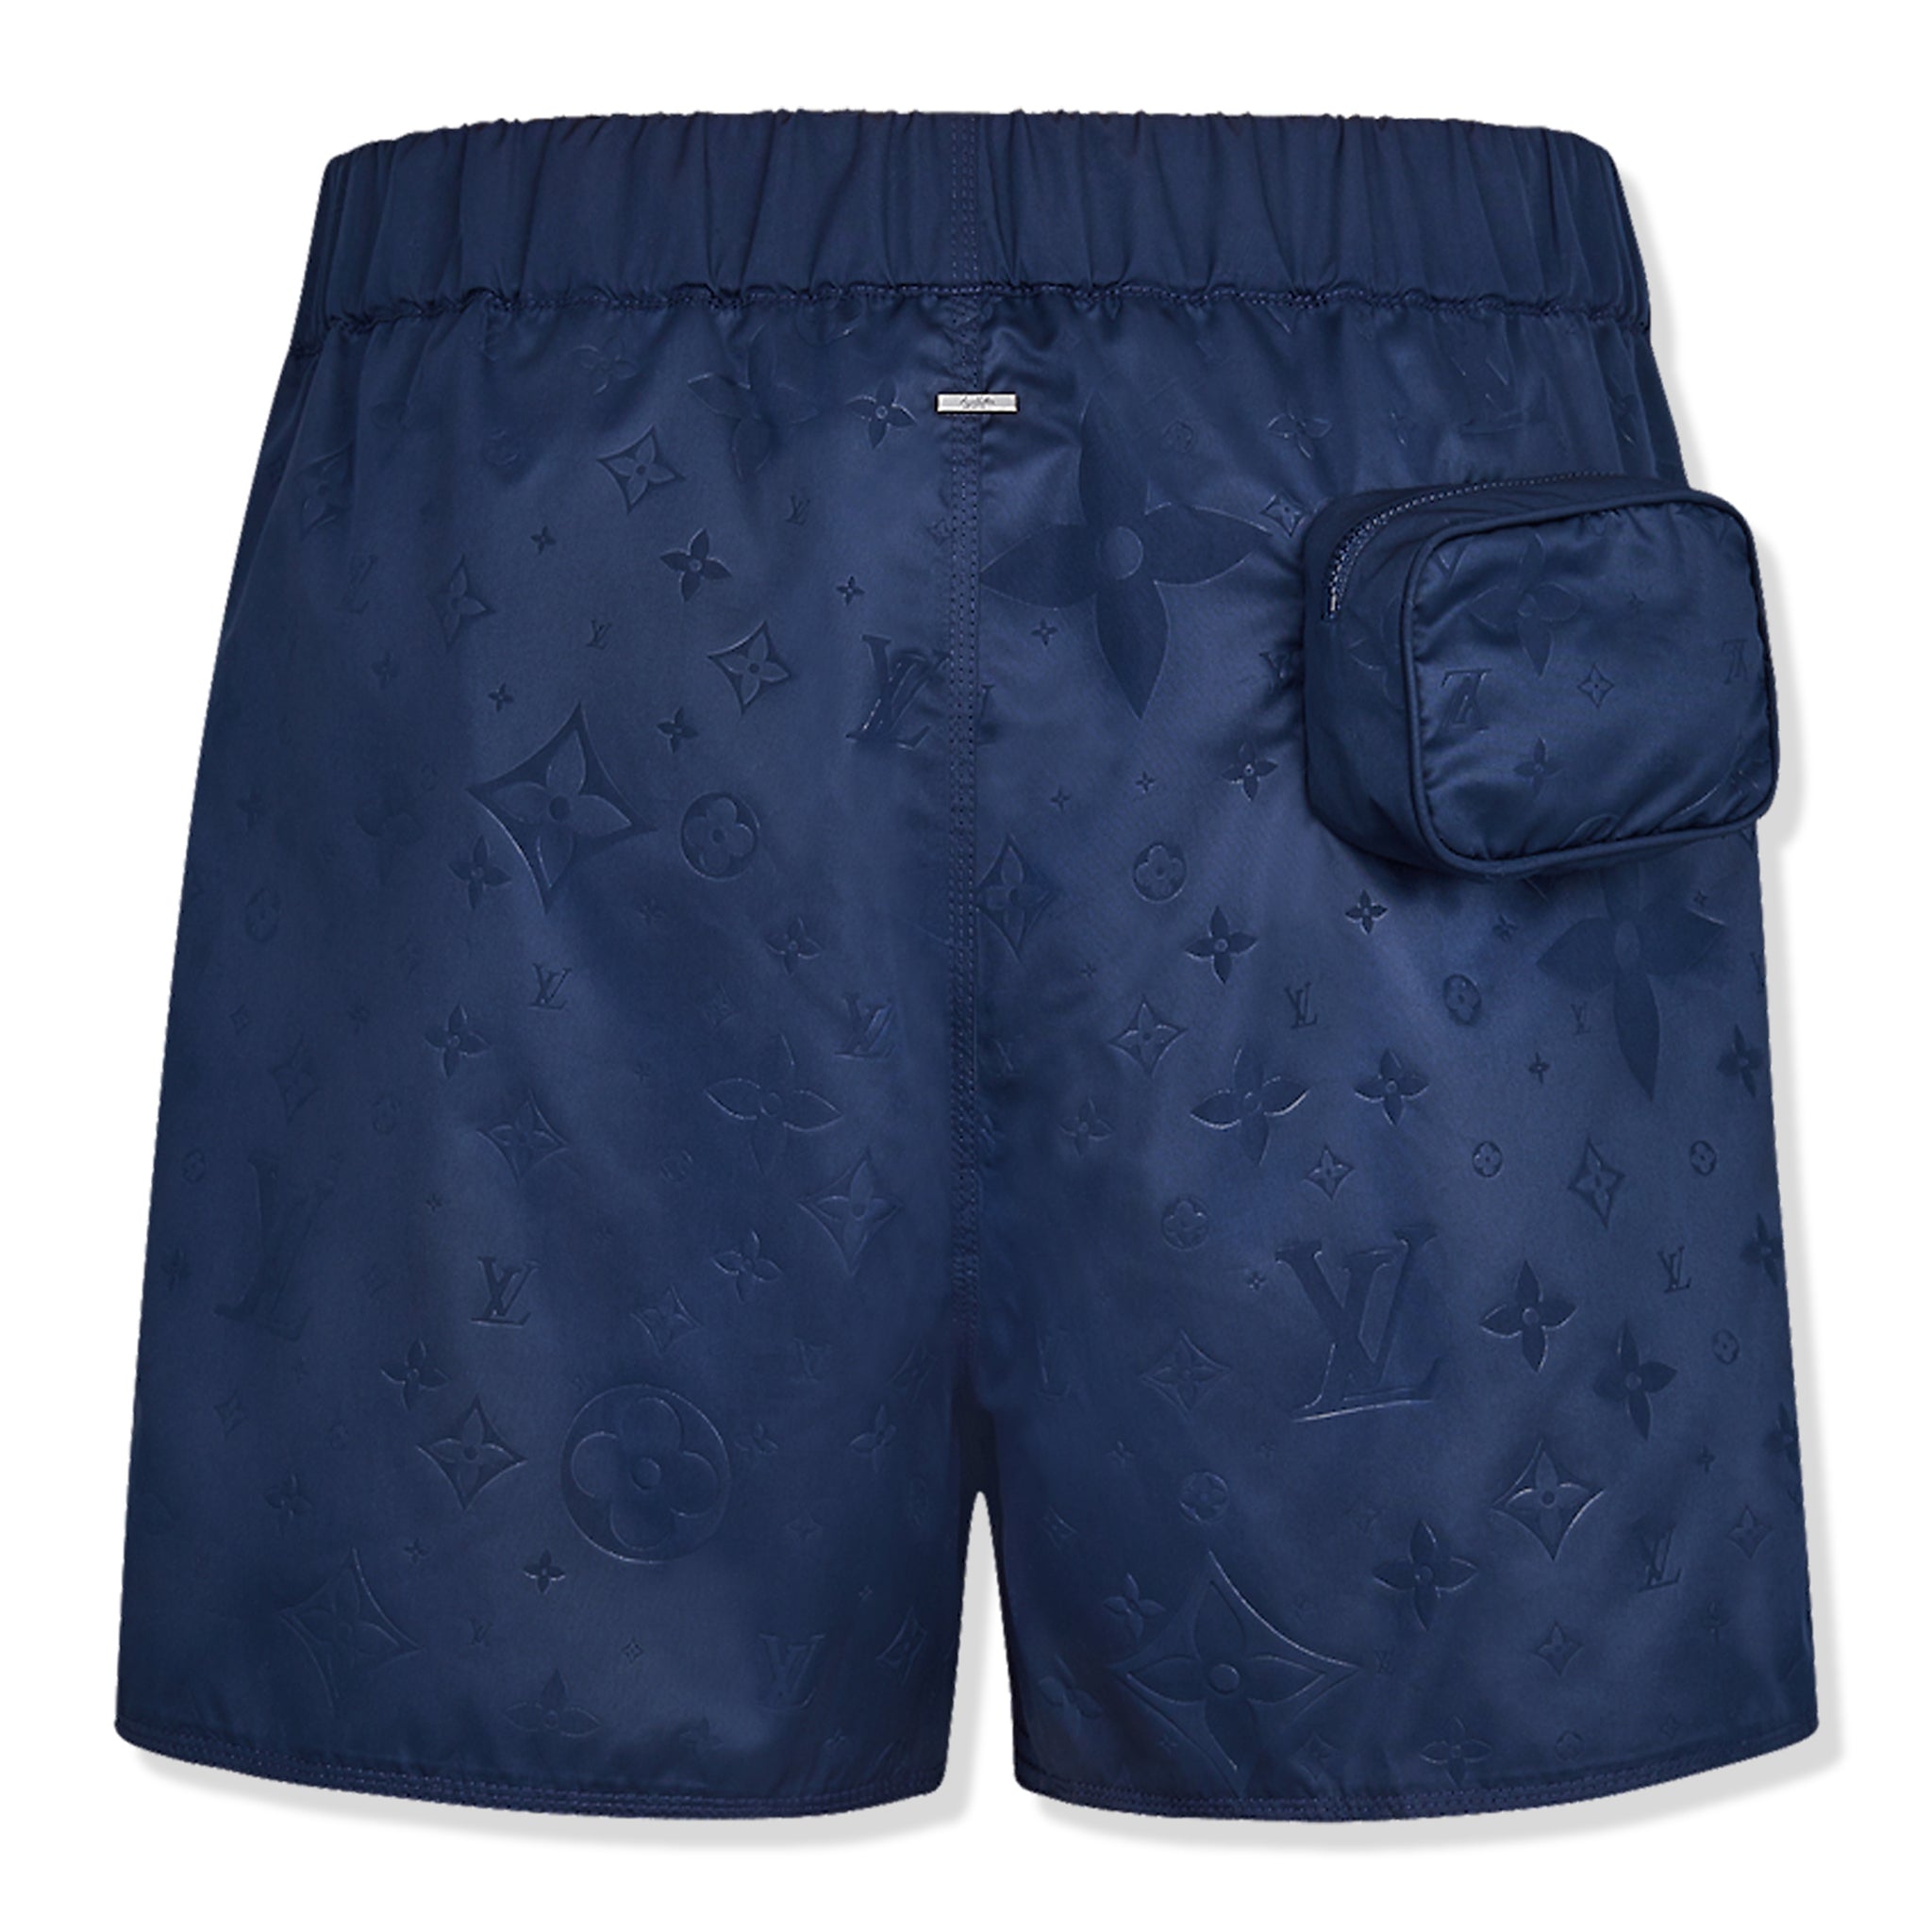 Image of Pre Owned - Louis Vuitton Monogram 3D Pocket Blue Board Shorts